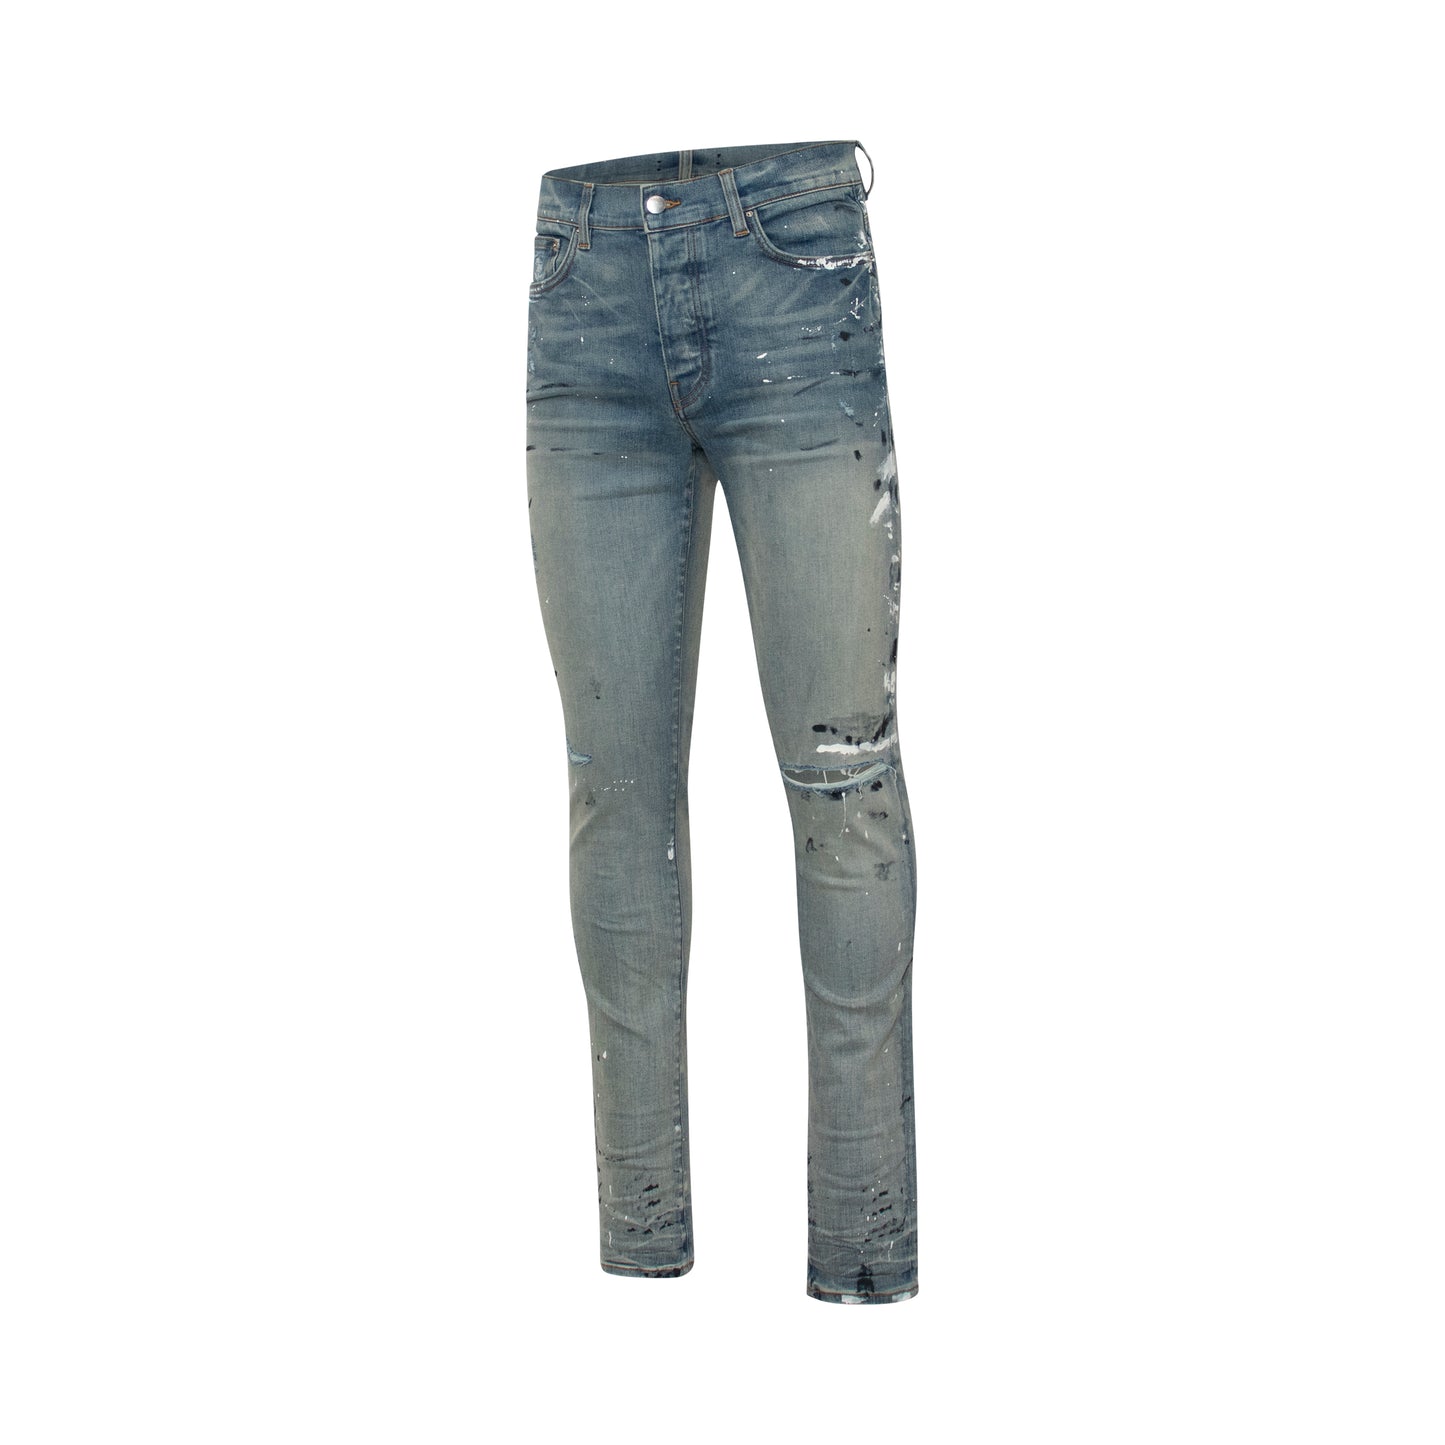 Hand Painted Slit Knee Jeans in Indigo